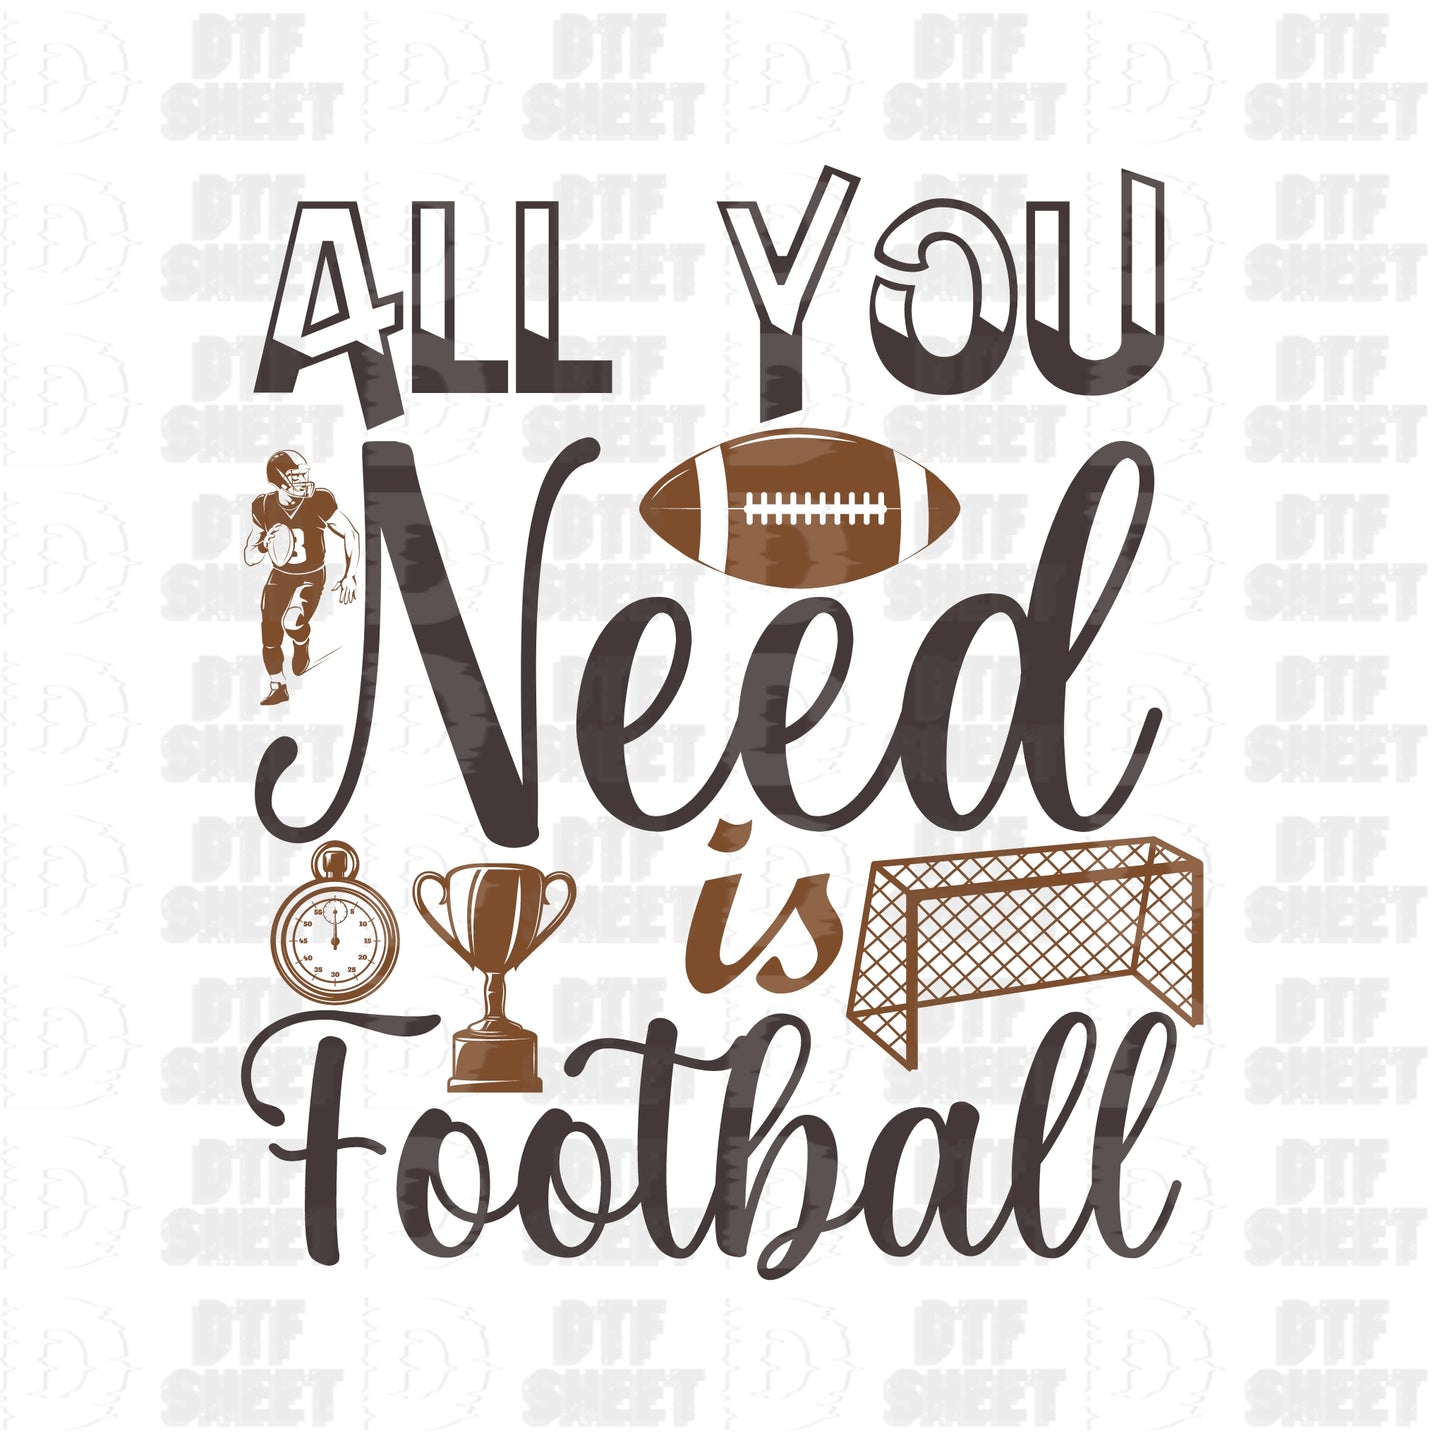 All You Need Is Football - Football Collection - DTF Transfer